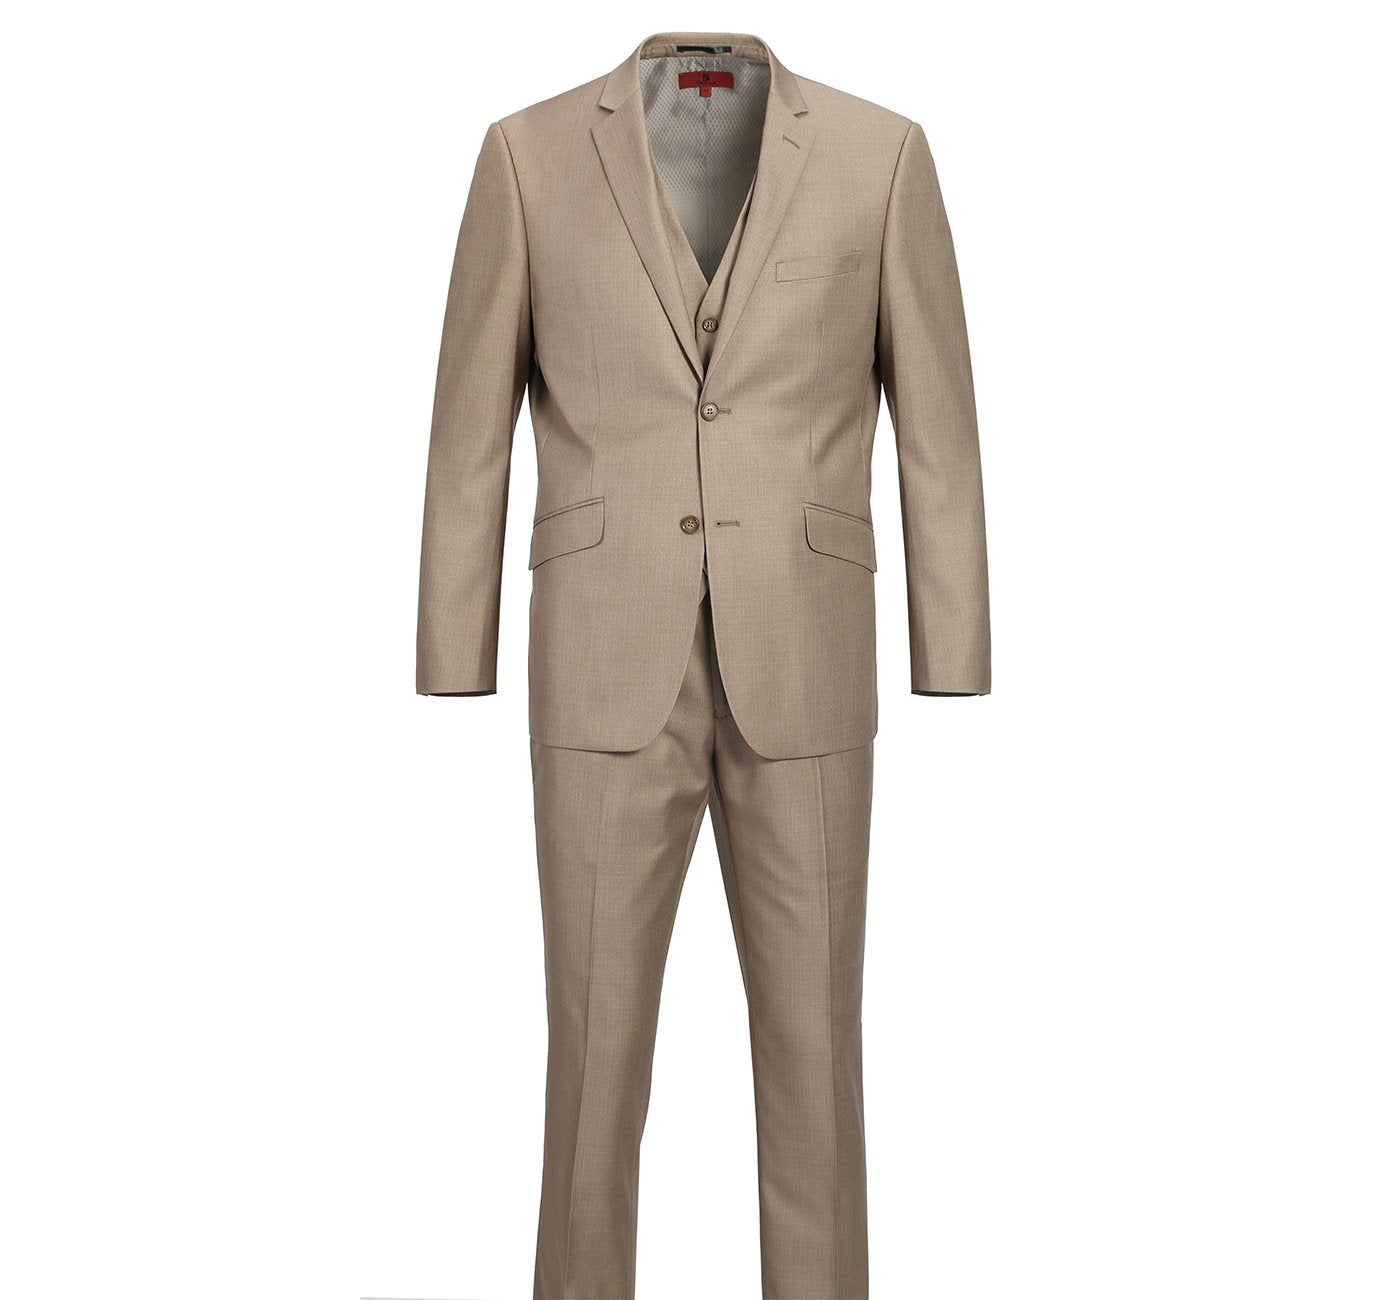 202-3 Men's Light Heathered Brown 2-Piece Single Breasted Notch Lapel Suit